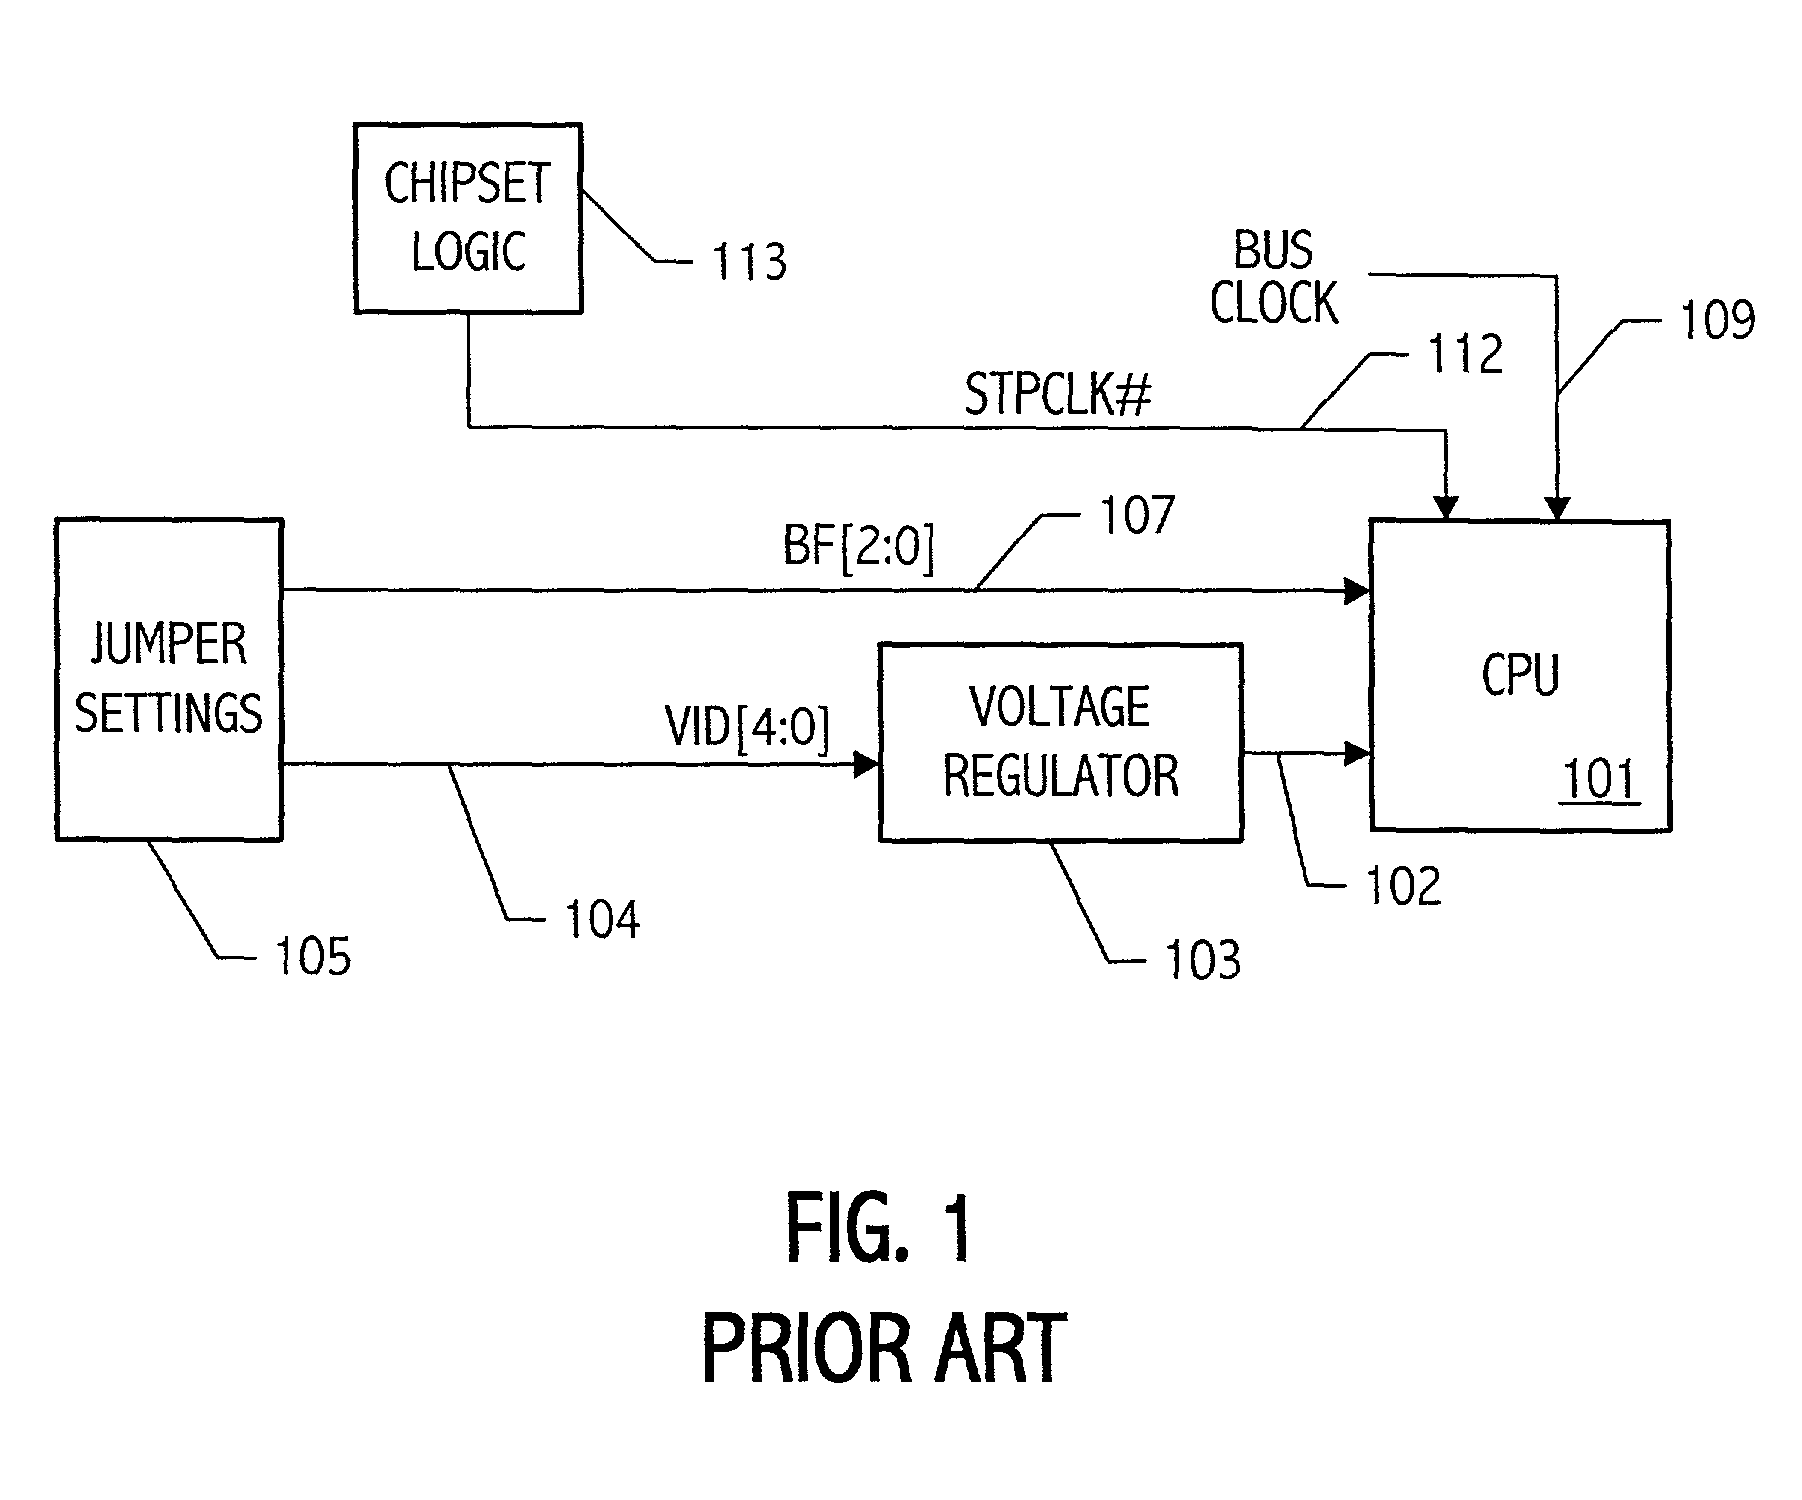 System and method for controlling an intergrated circuit to enter a predetermined performance state by skipping all intermediate states based on the determined utilization of the intergrated circuit